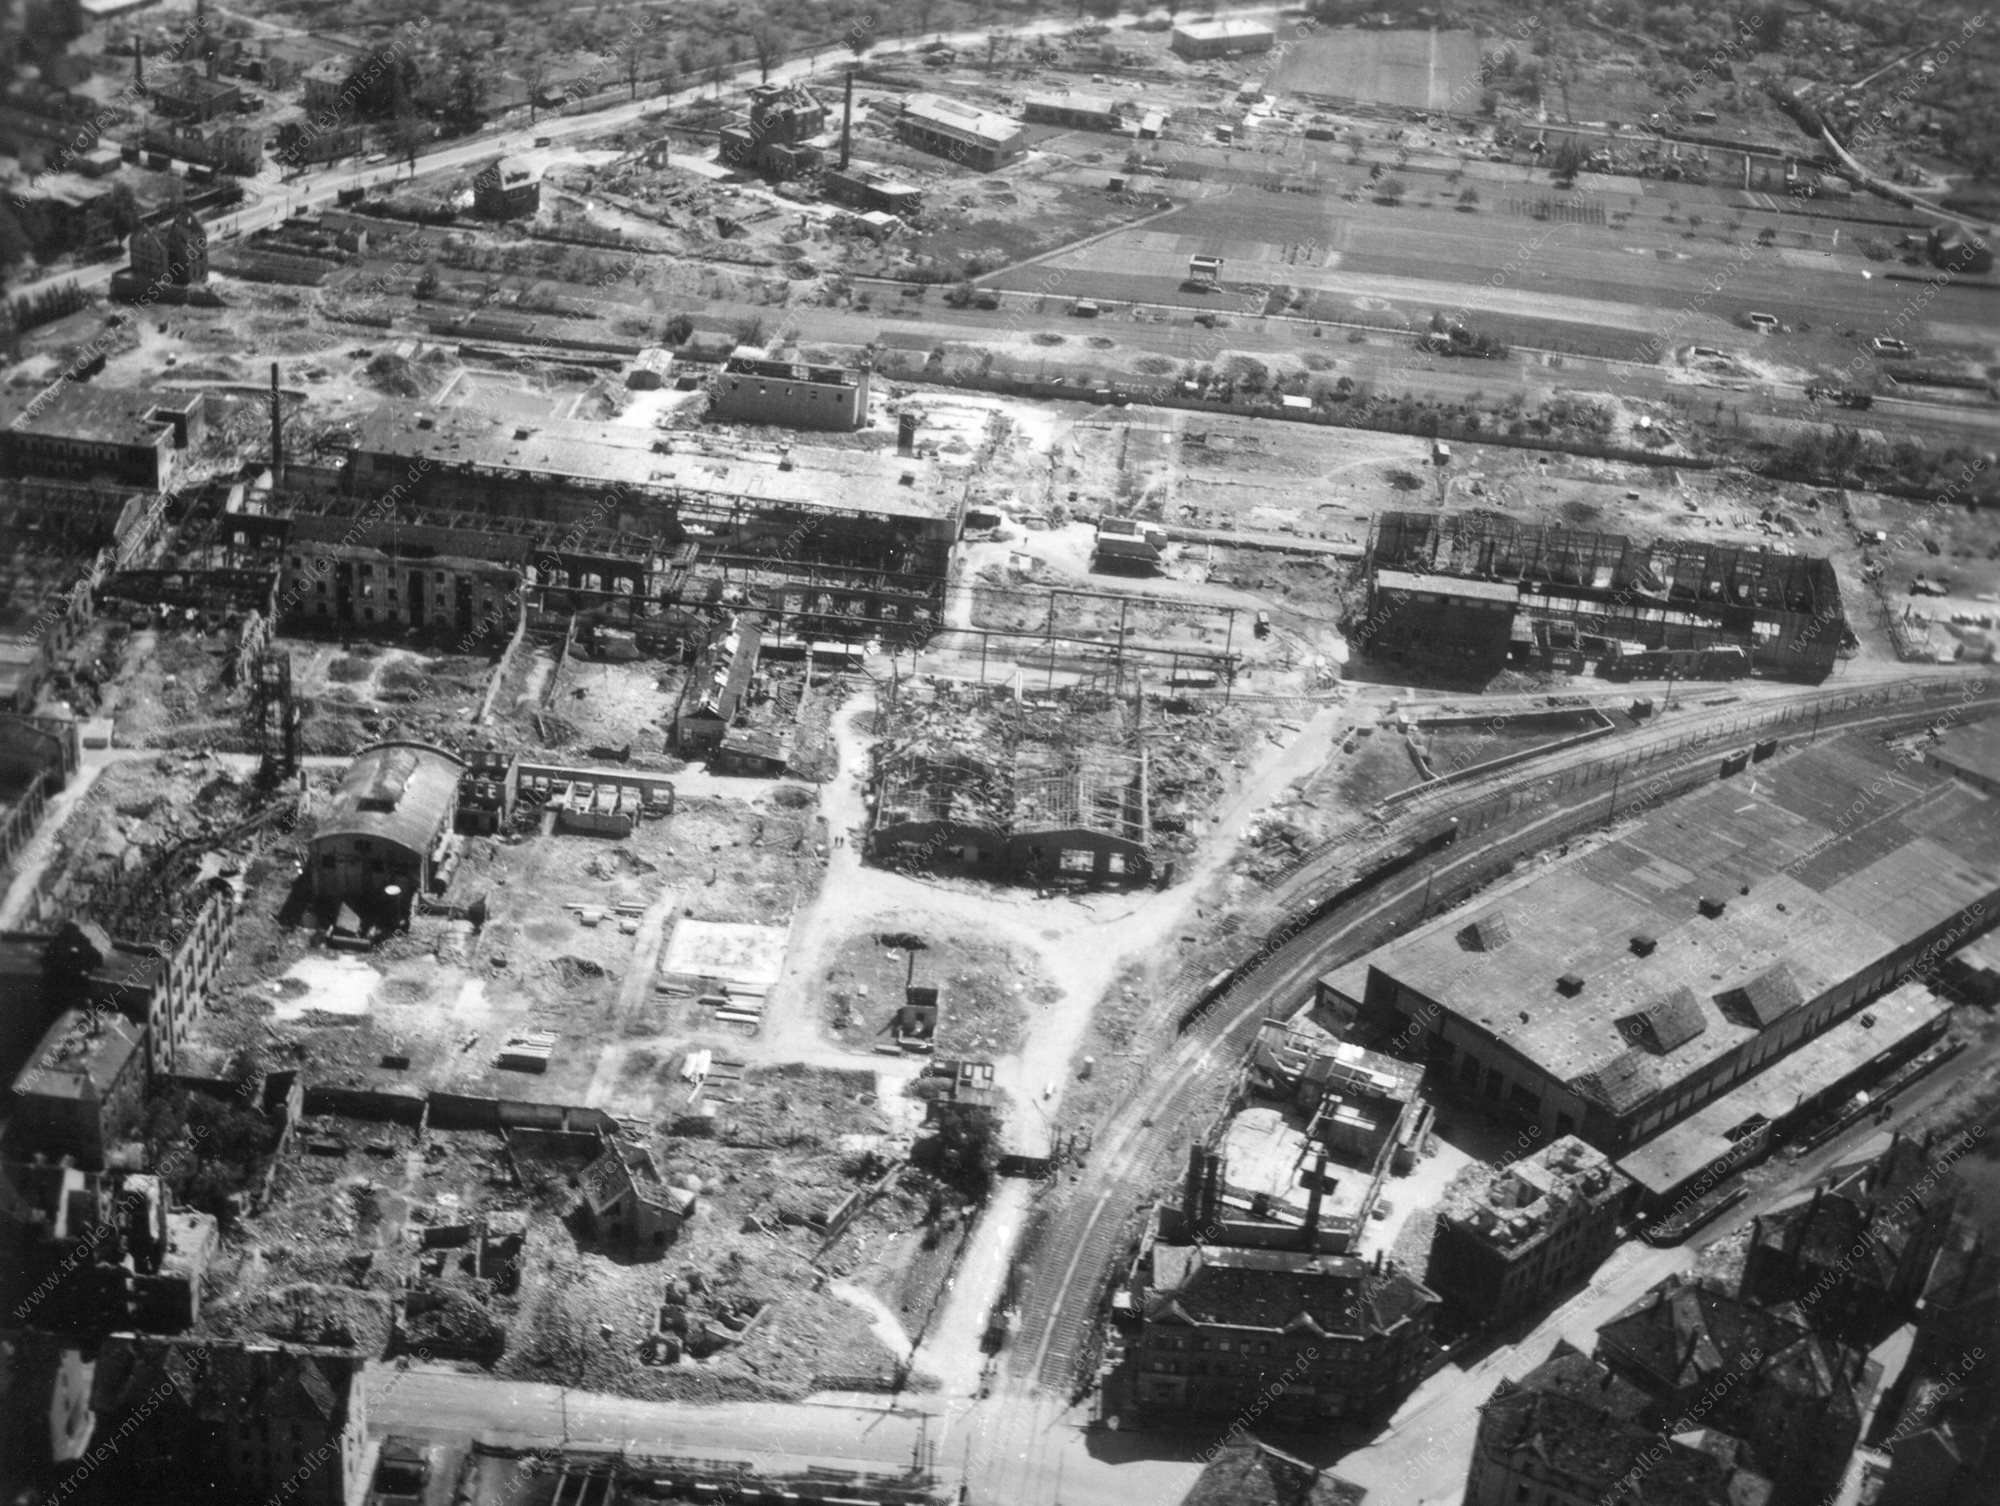 Brunswick from above: Aerial view after Allied air raids in World War II